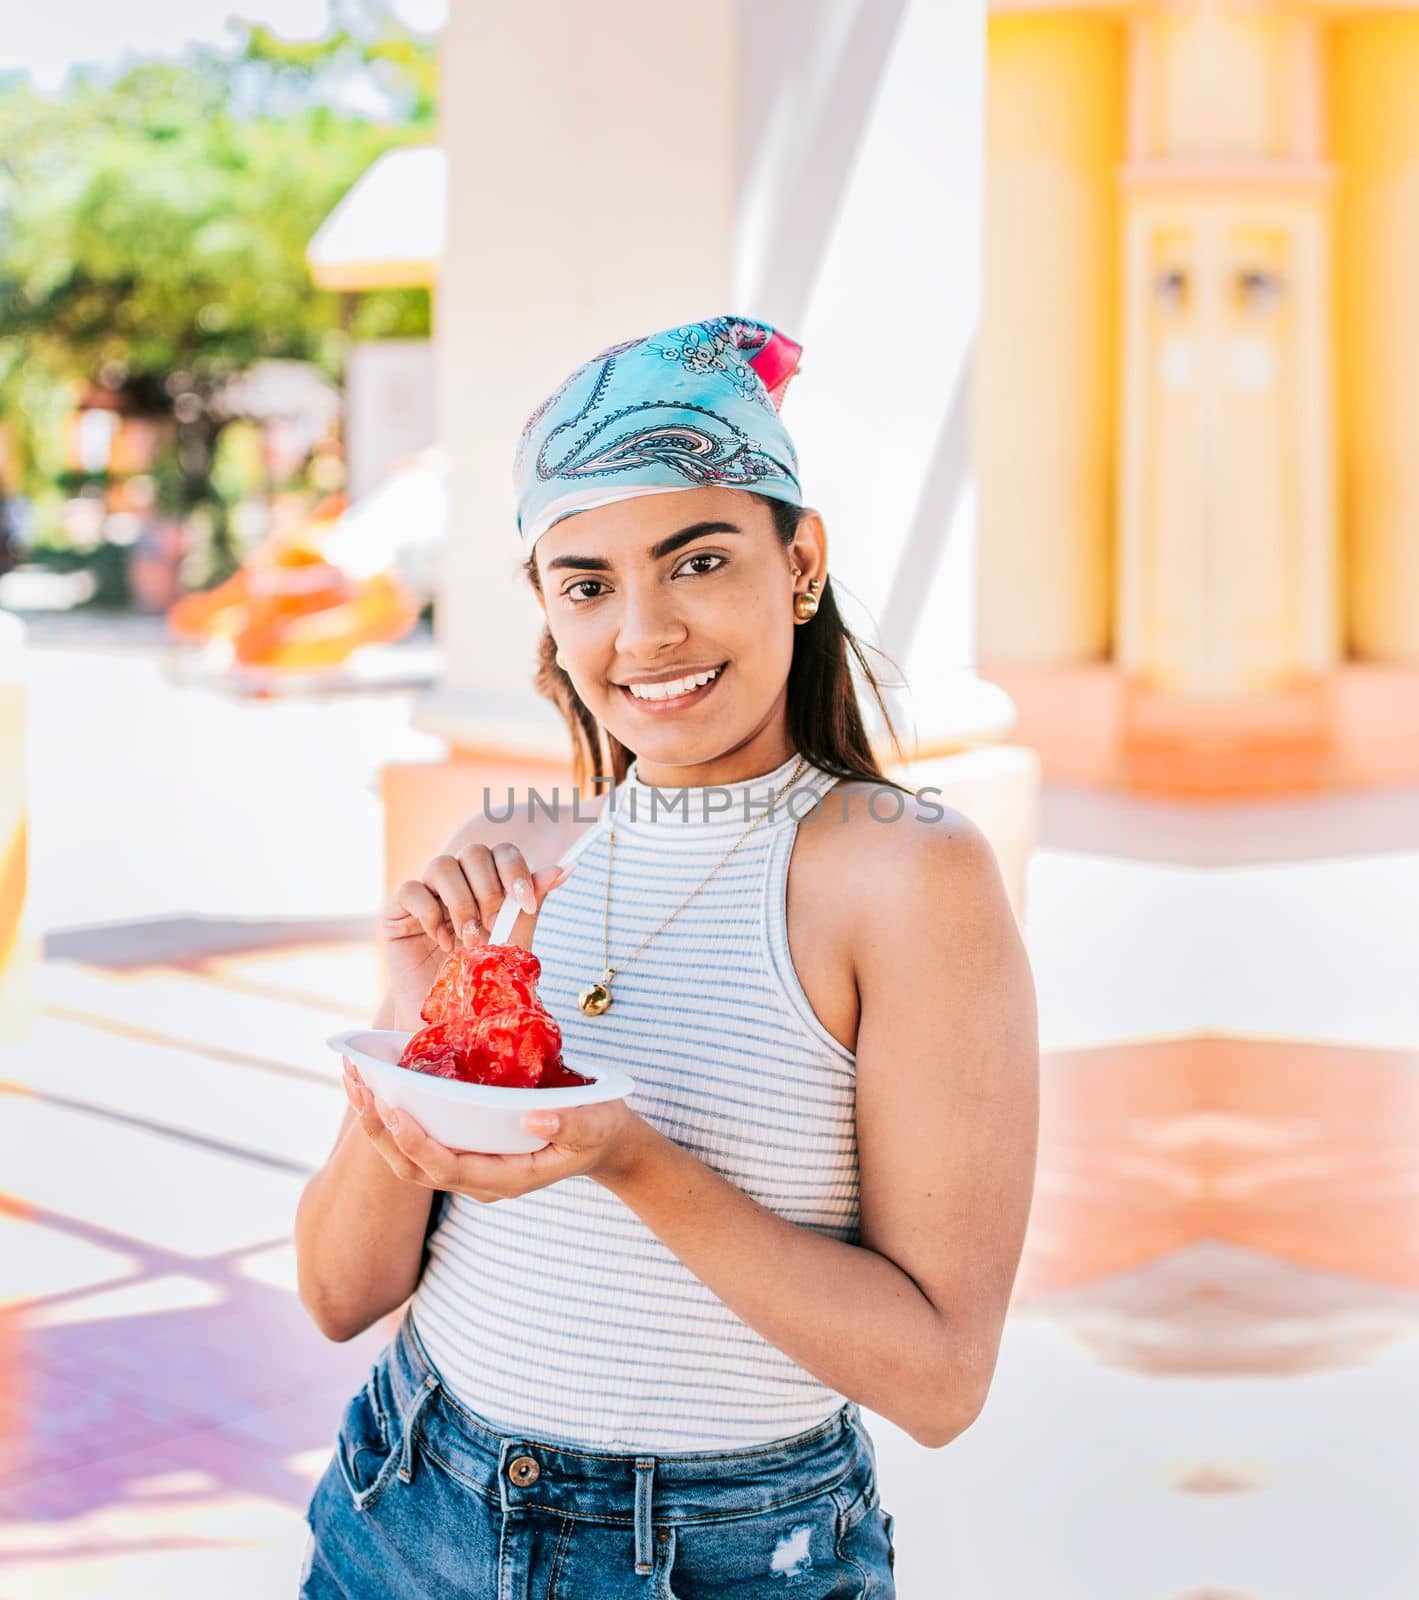 Portrait of smiling girl holding shaved ice in the street. Young woman holding a cup of shaved ice on the street. Concept of a girl with a Nicaraguan raspado. ICE SHAVING from Nagarote by isaiphoto